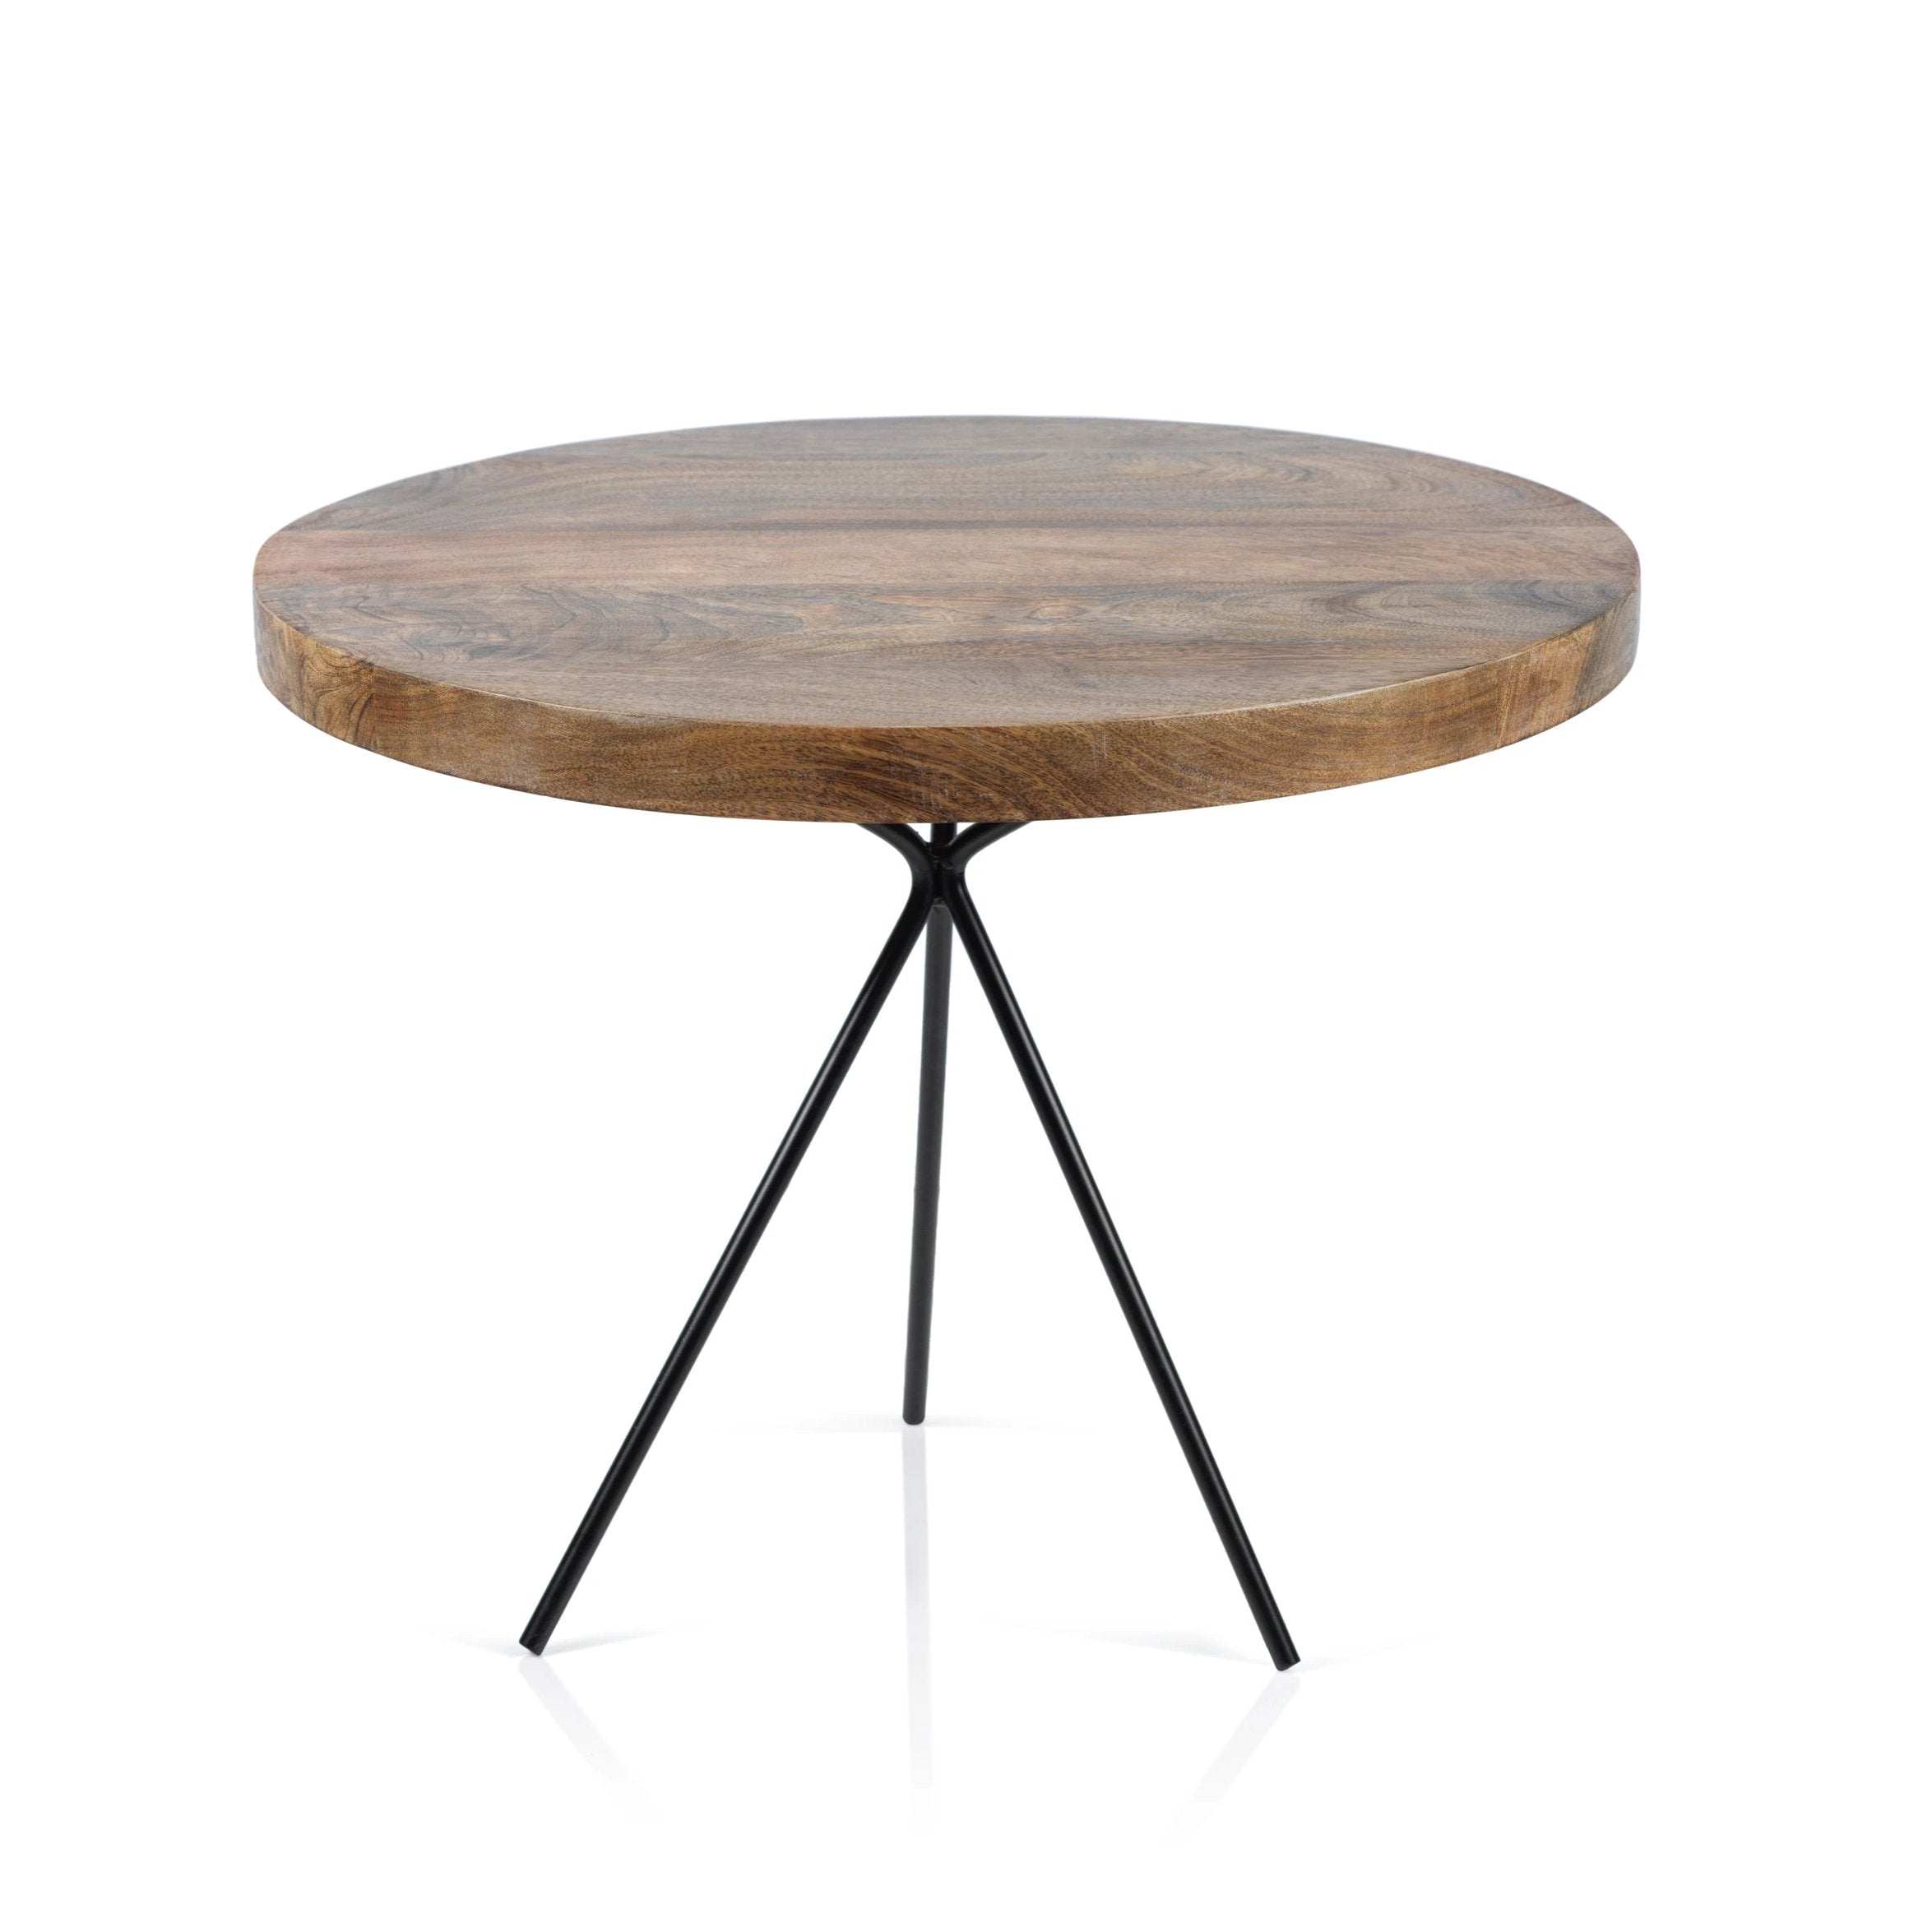 Heritage Mango Tables - CARLYLE AVENUE